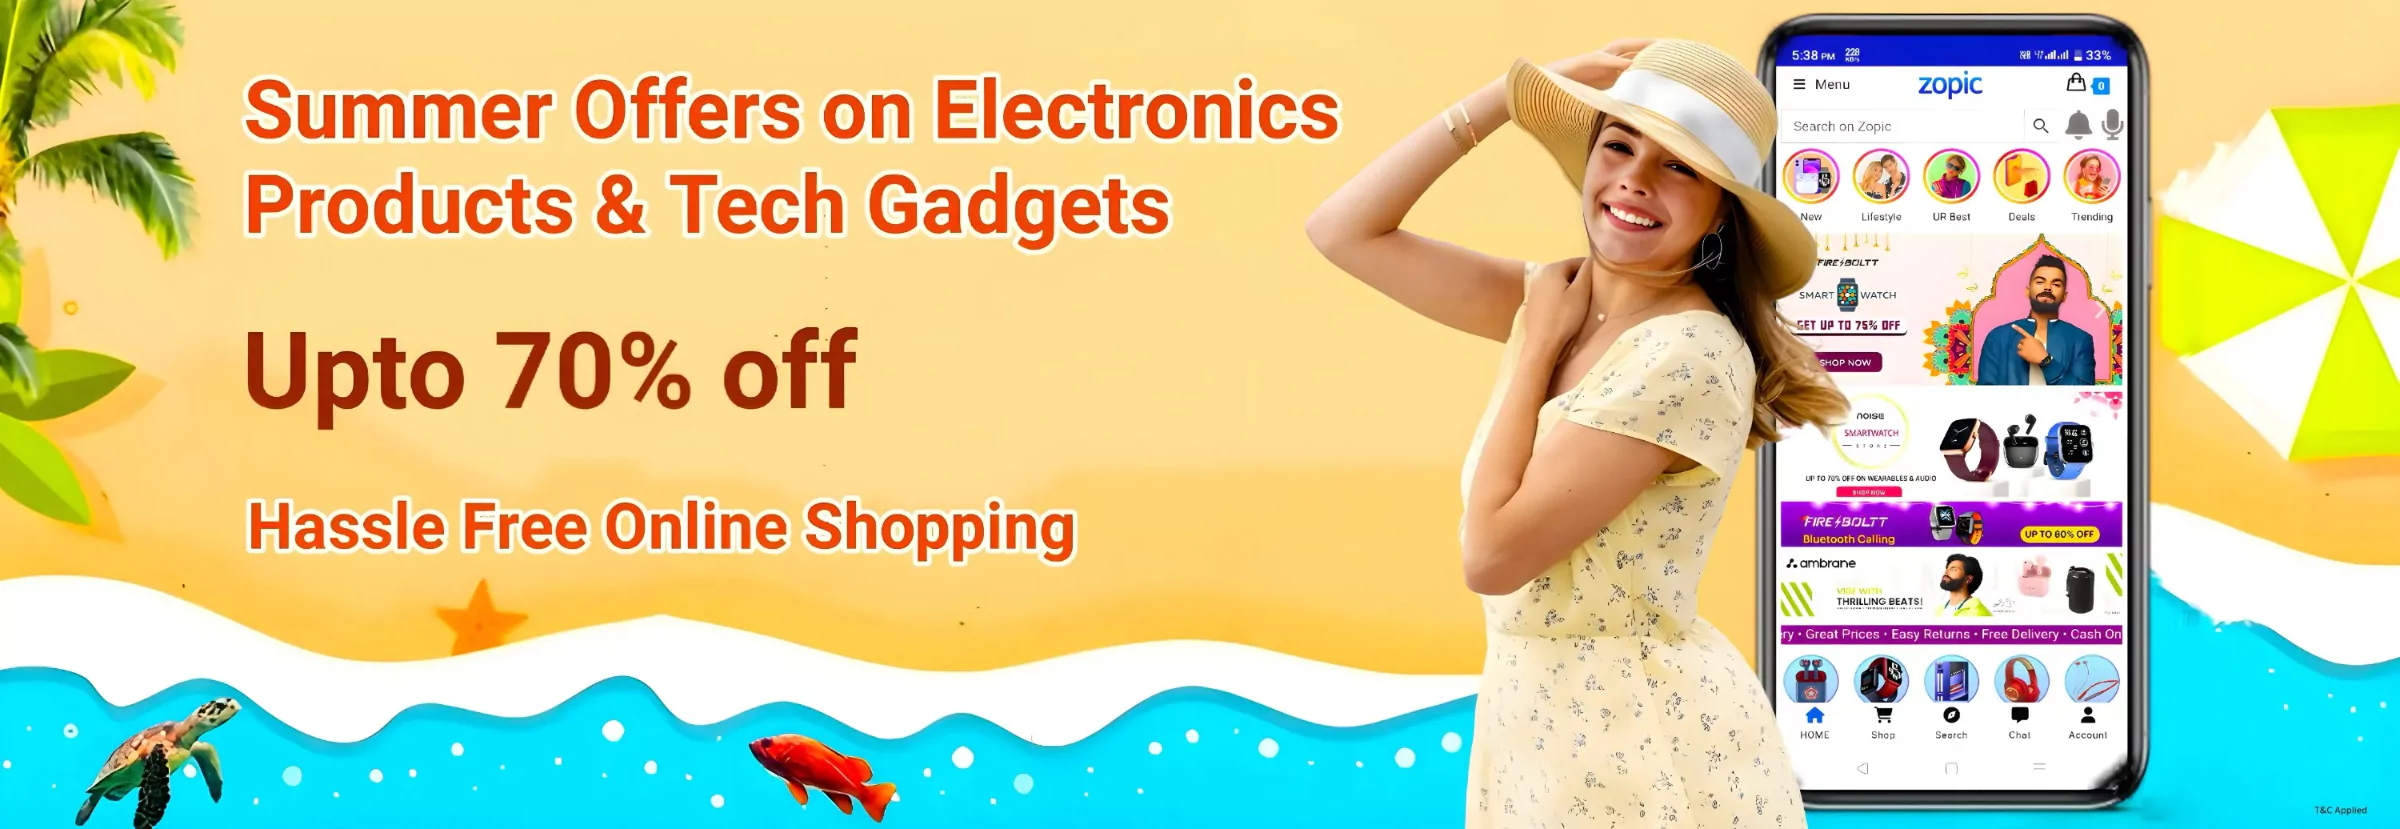 Zopic summer sale offers best prices and upto 70 percent off online shopping free and fast delivery banner neckband speaker , earphones, earbuds, headphones, mobiles , smaetphone, smartwatch, computer, laptop, accessories